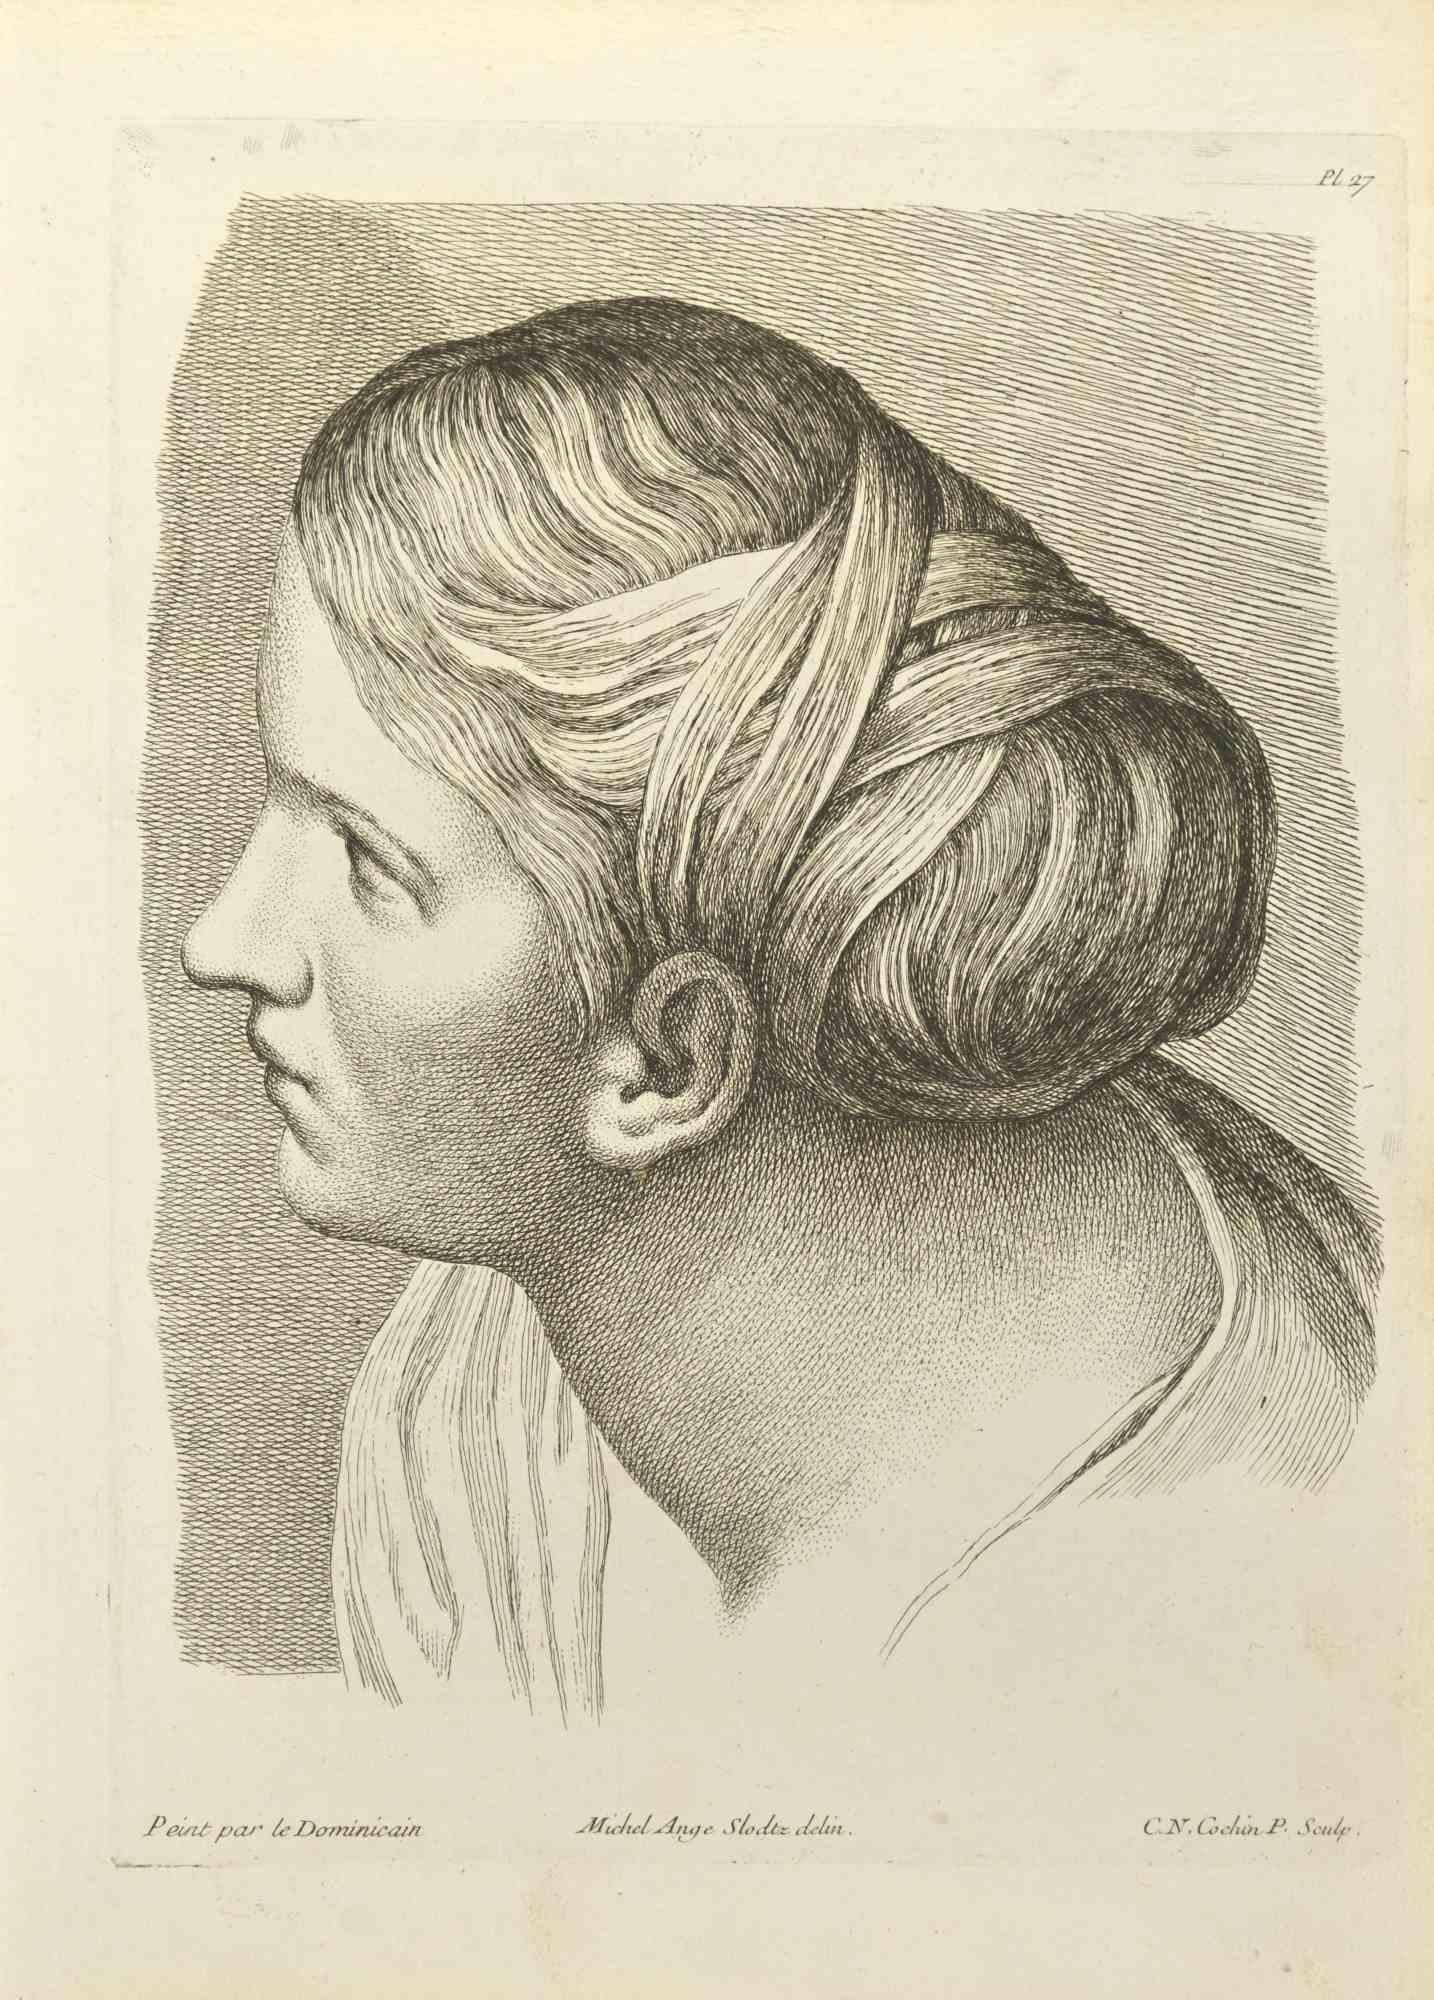 Portrait after Domenichino is an etching realized by Nicholas Cochin in 1755.

Good conditions.

signed on plate.

The artwork is depicted through confident strokes.

The etching was realized for the anatomy study “JOMBERT, Charles-Antoine